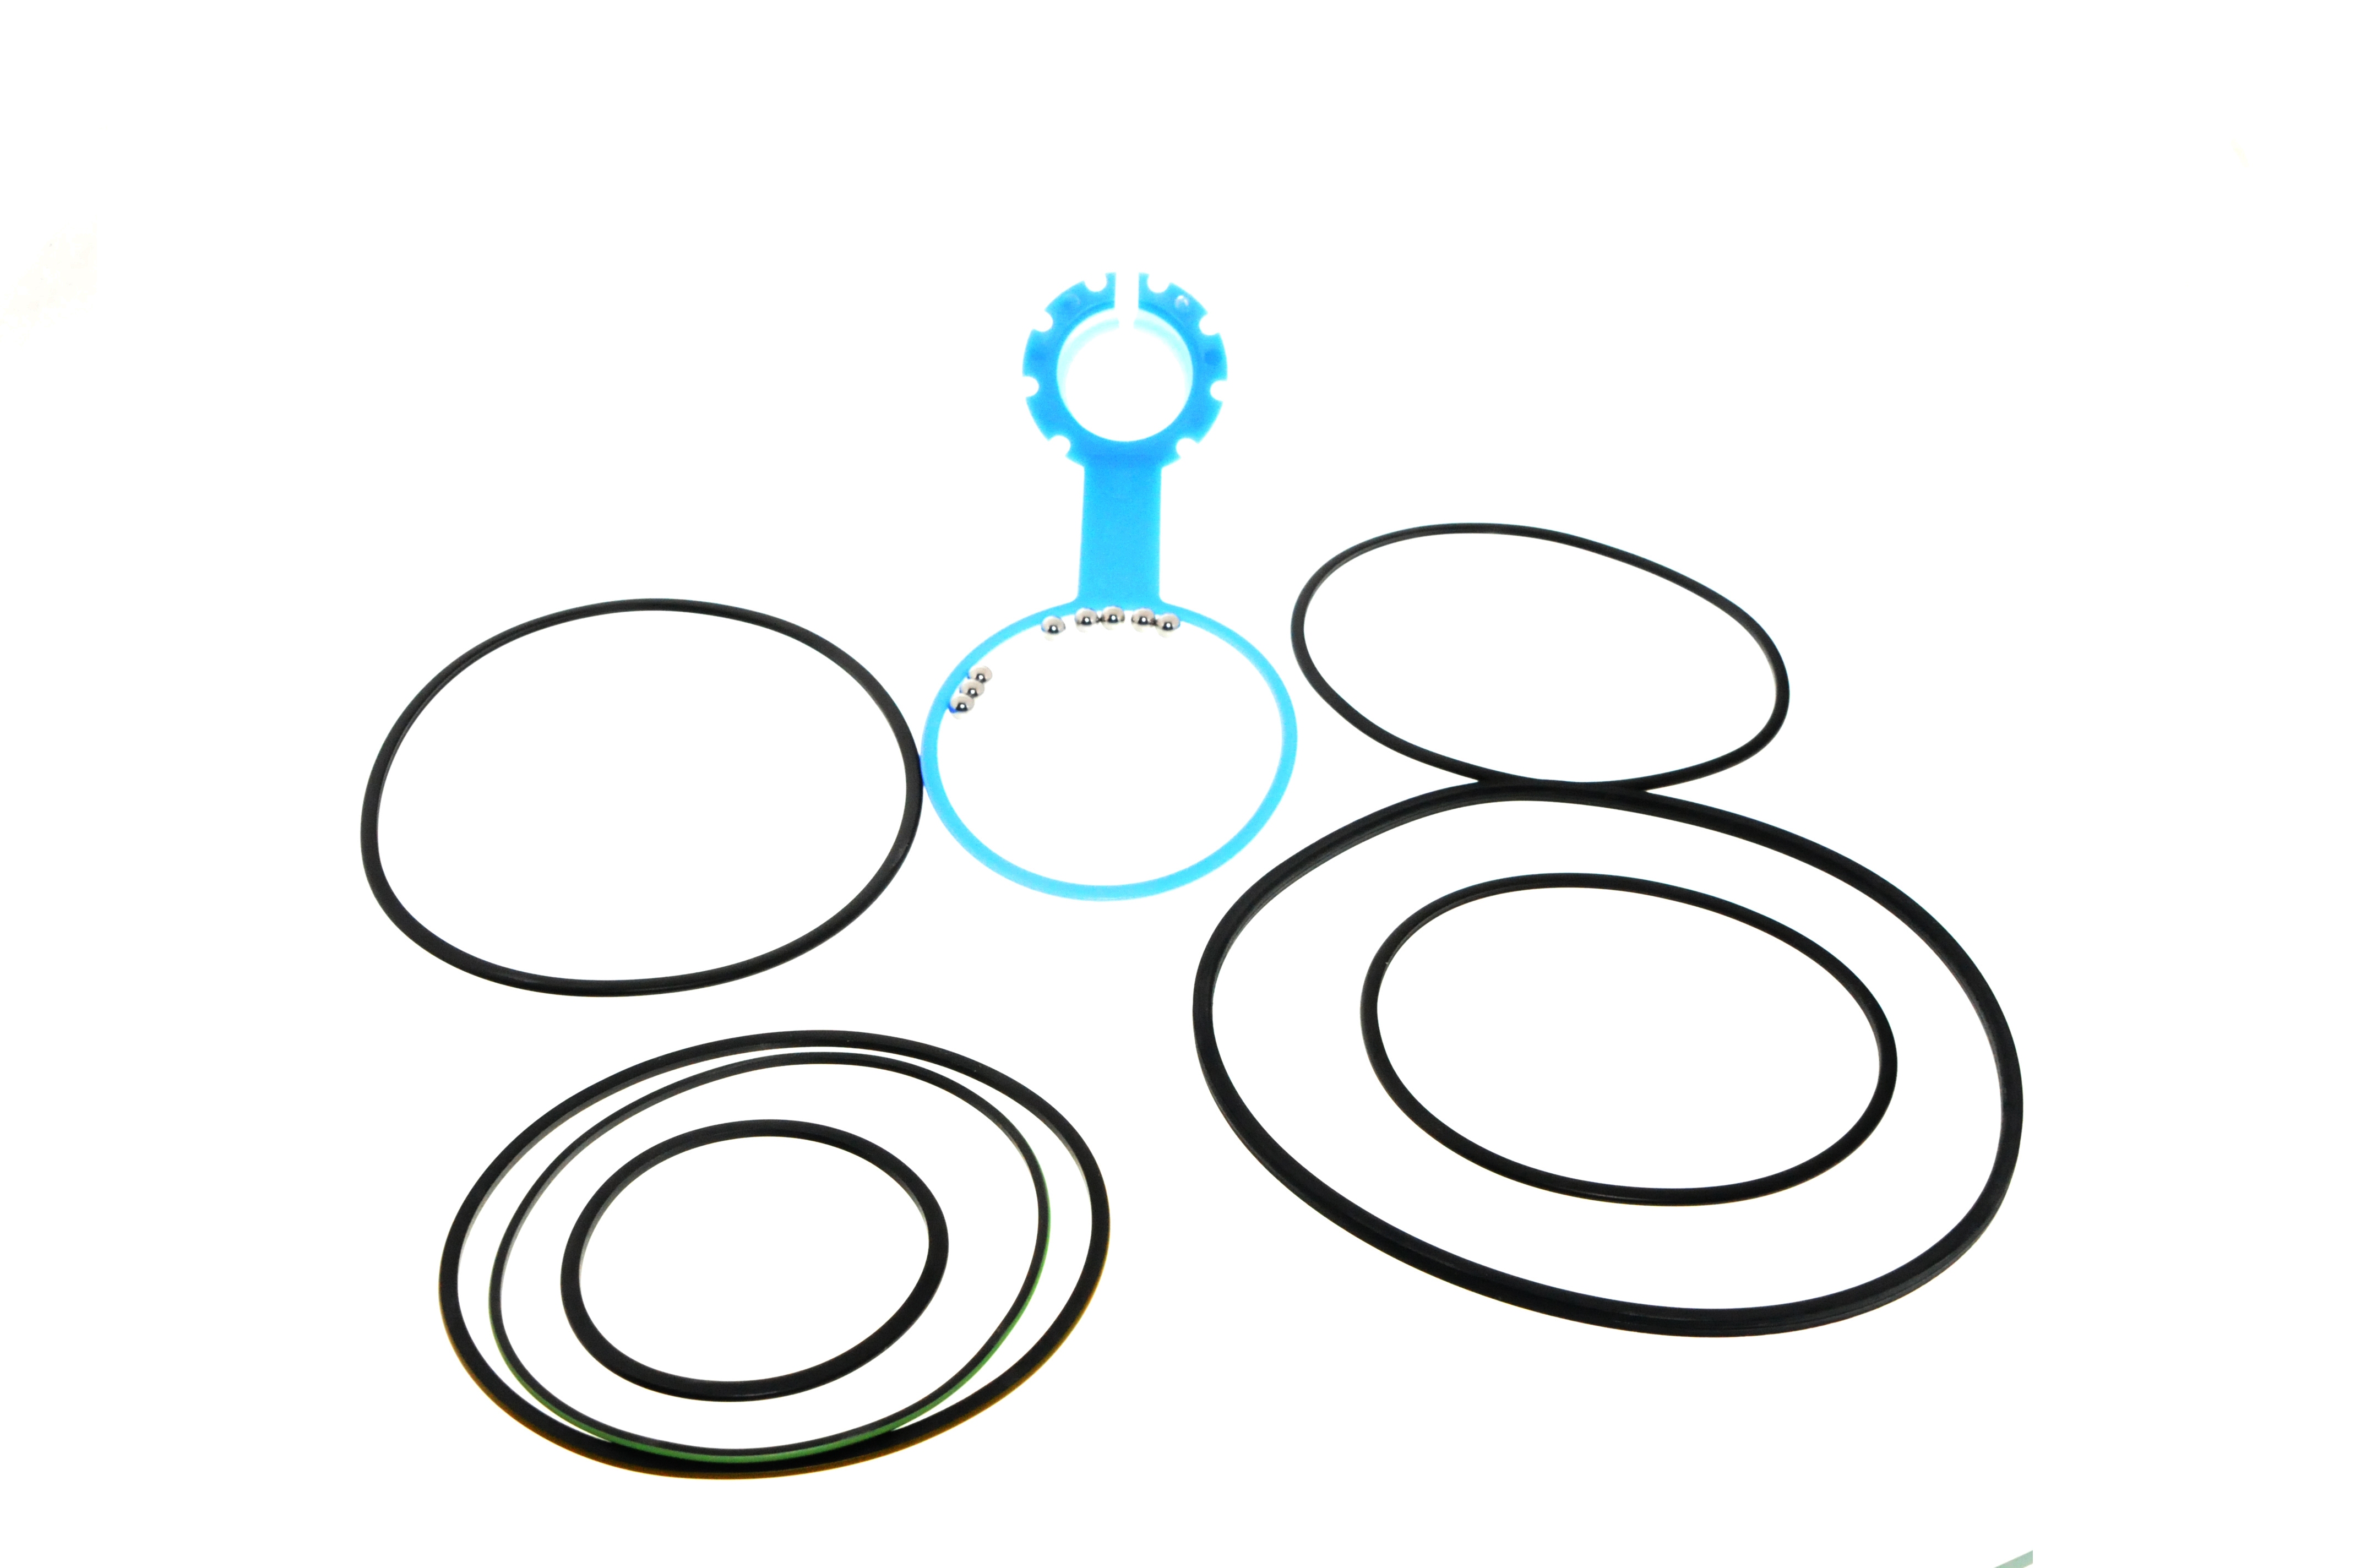 GM GENUINE PARTS - Automatic Transmission Seals and O-Rings Kit - GMP 24269583